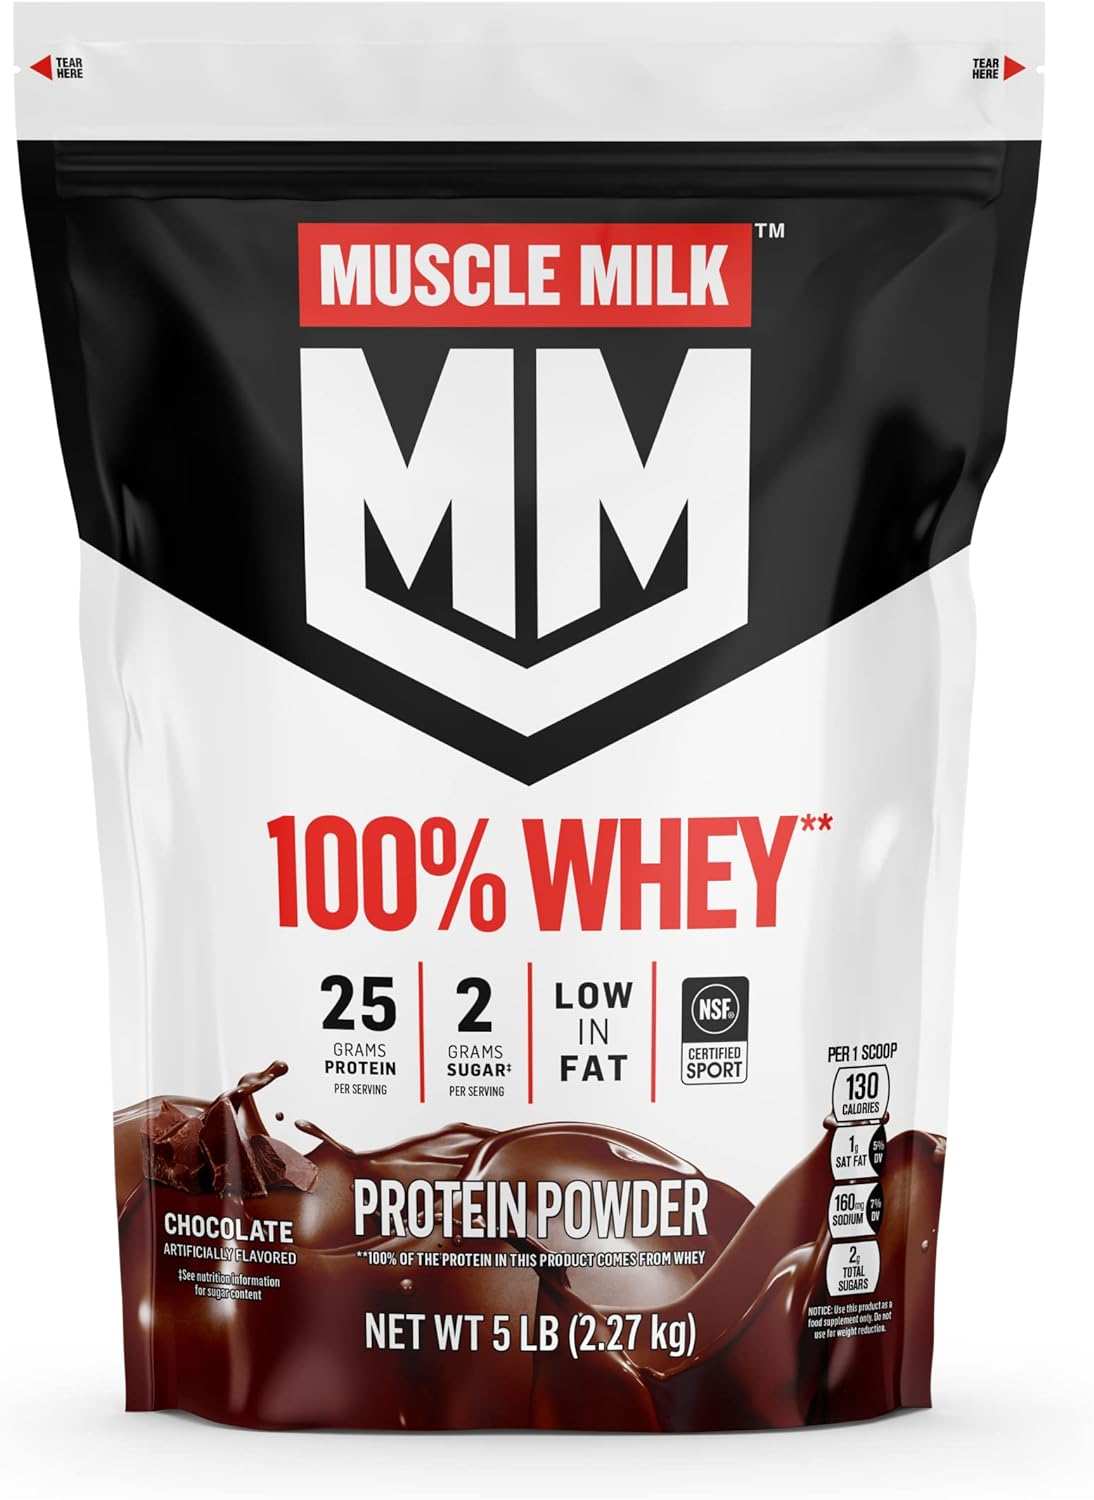 Muscle Milk 100% Whey Protein Powder, Chocolate, 5 Pound, 66 Servings,